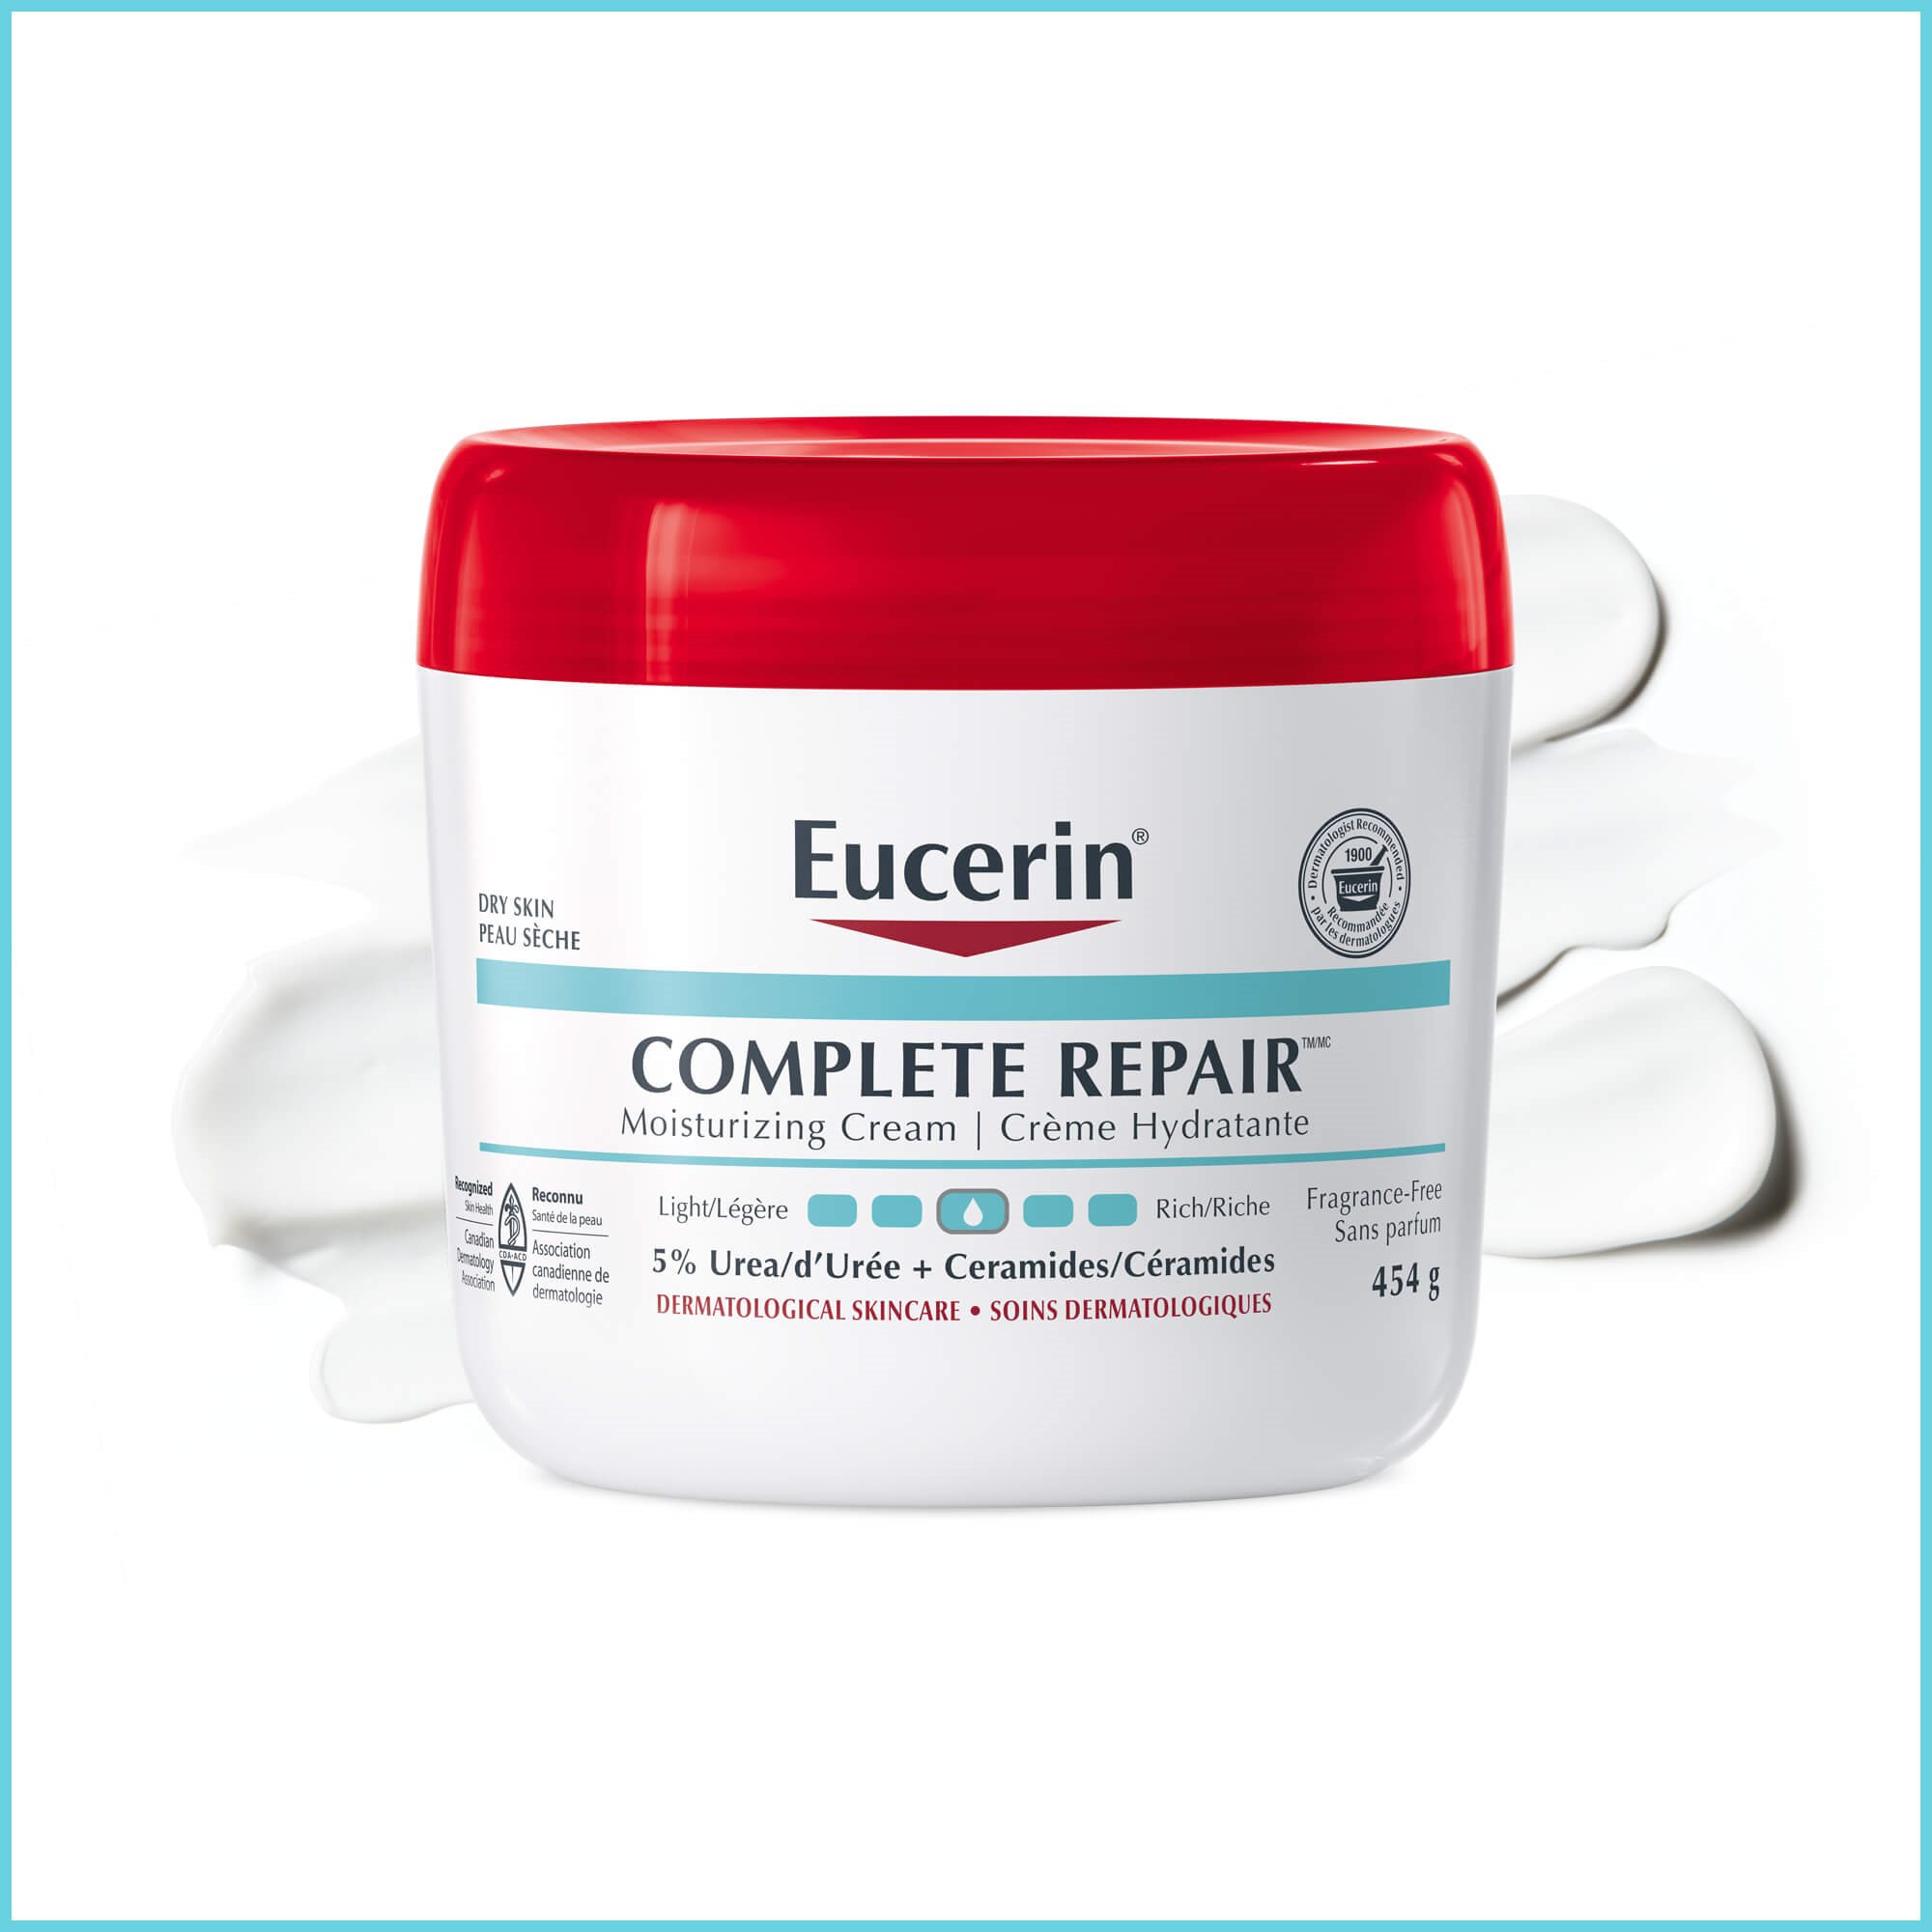 Image of The Eucerin Complete Repair 454g Cream against a white background with product spread behind it.